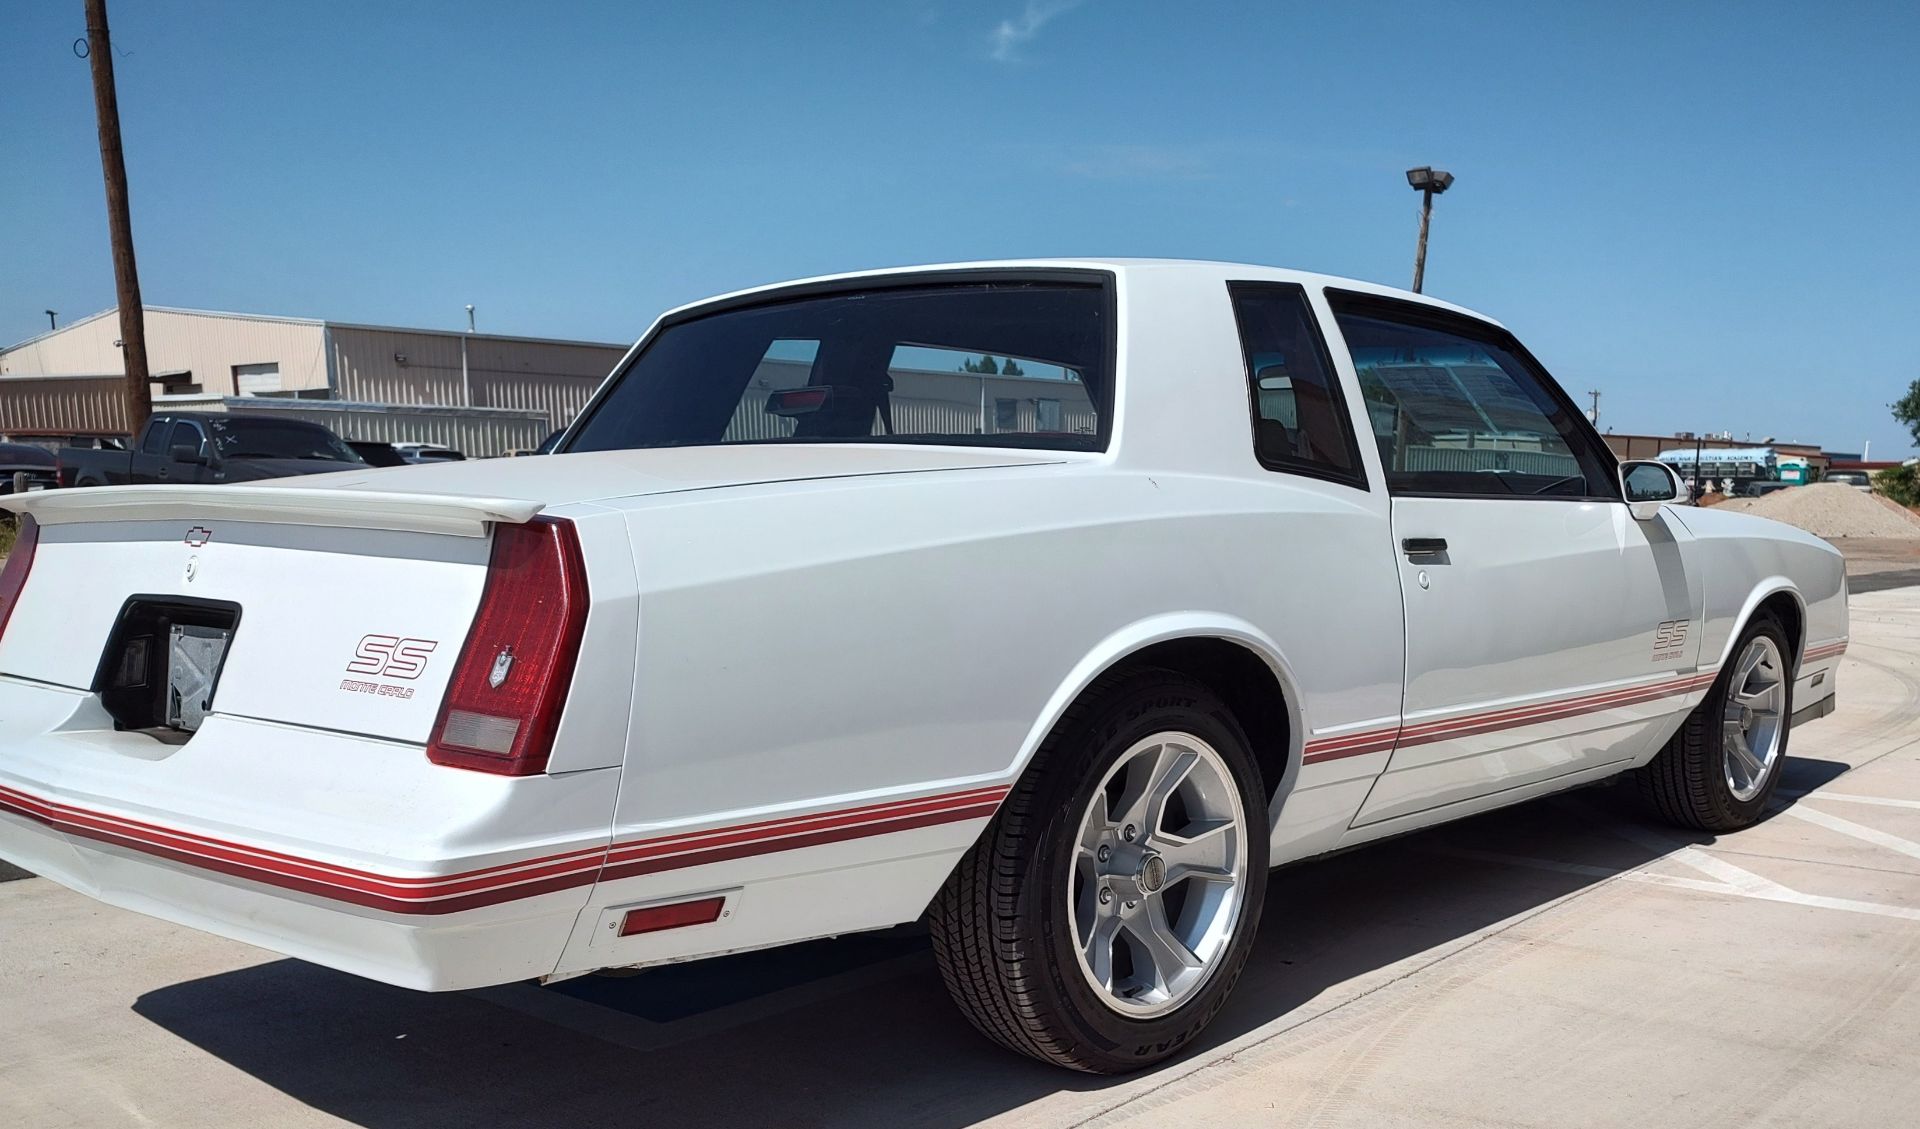 1987 Chevrolet Monte Carlo SS - Image 5 of 15